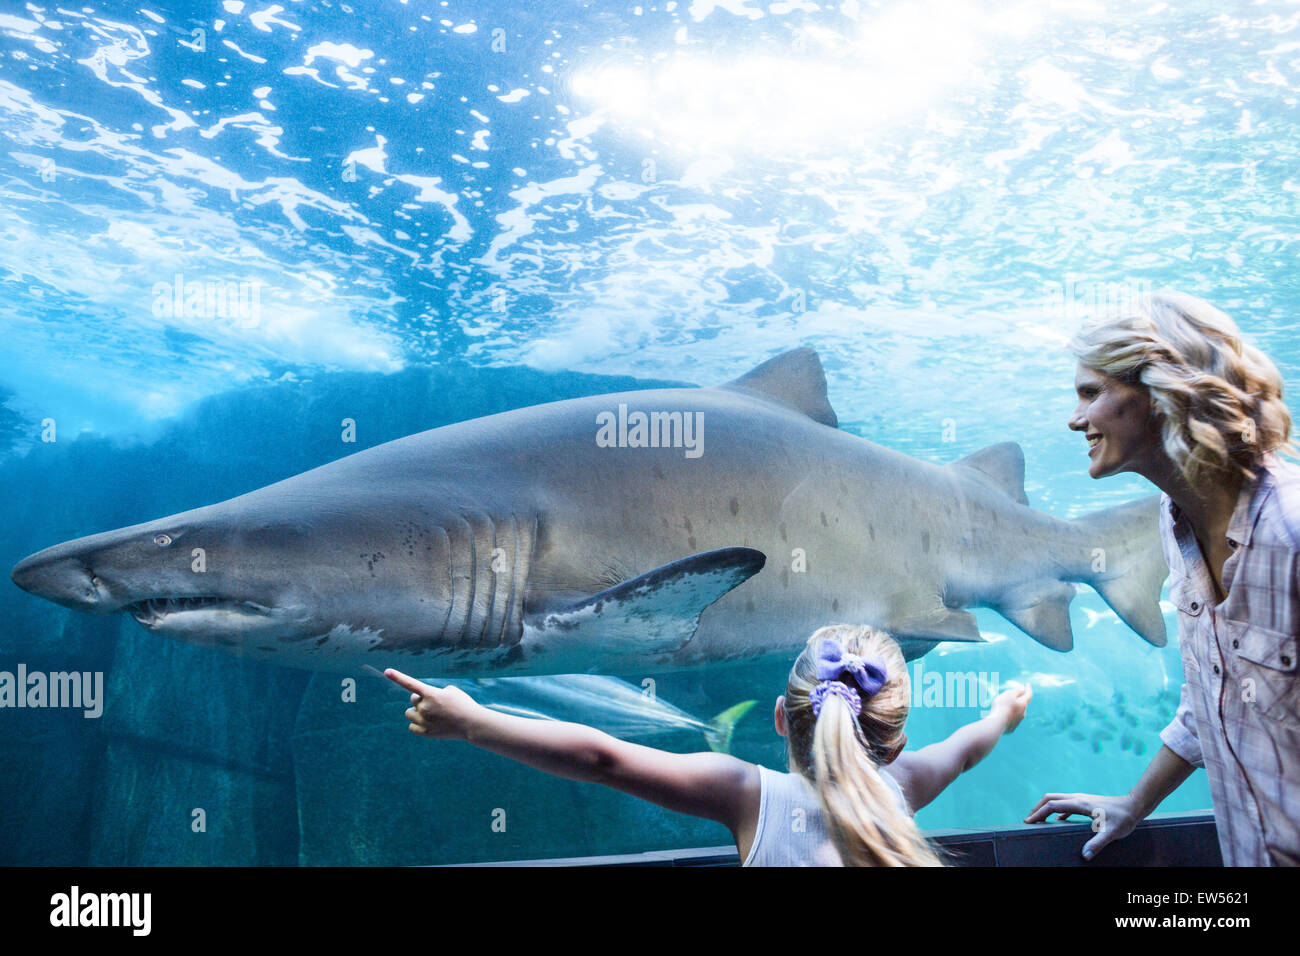 Daughter measure a shark with her hands Stock Photo